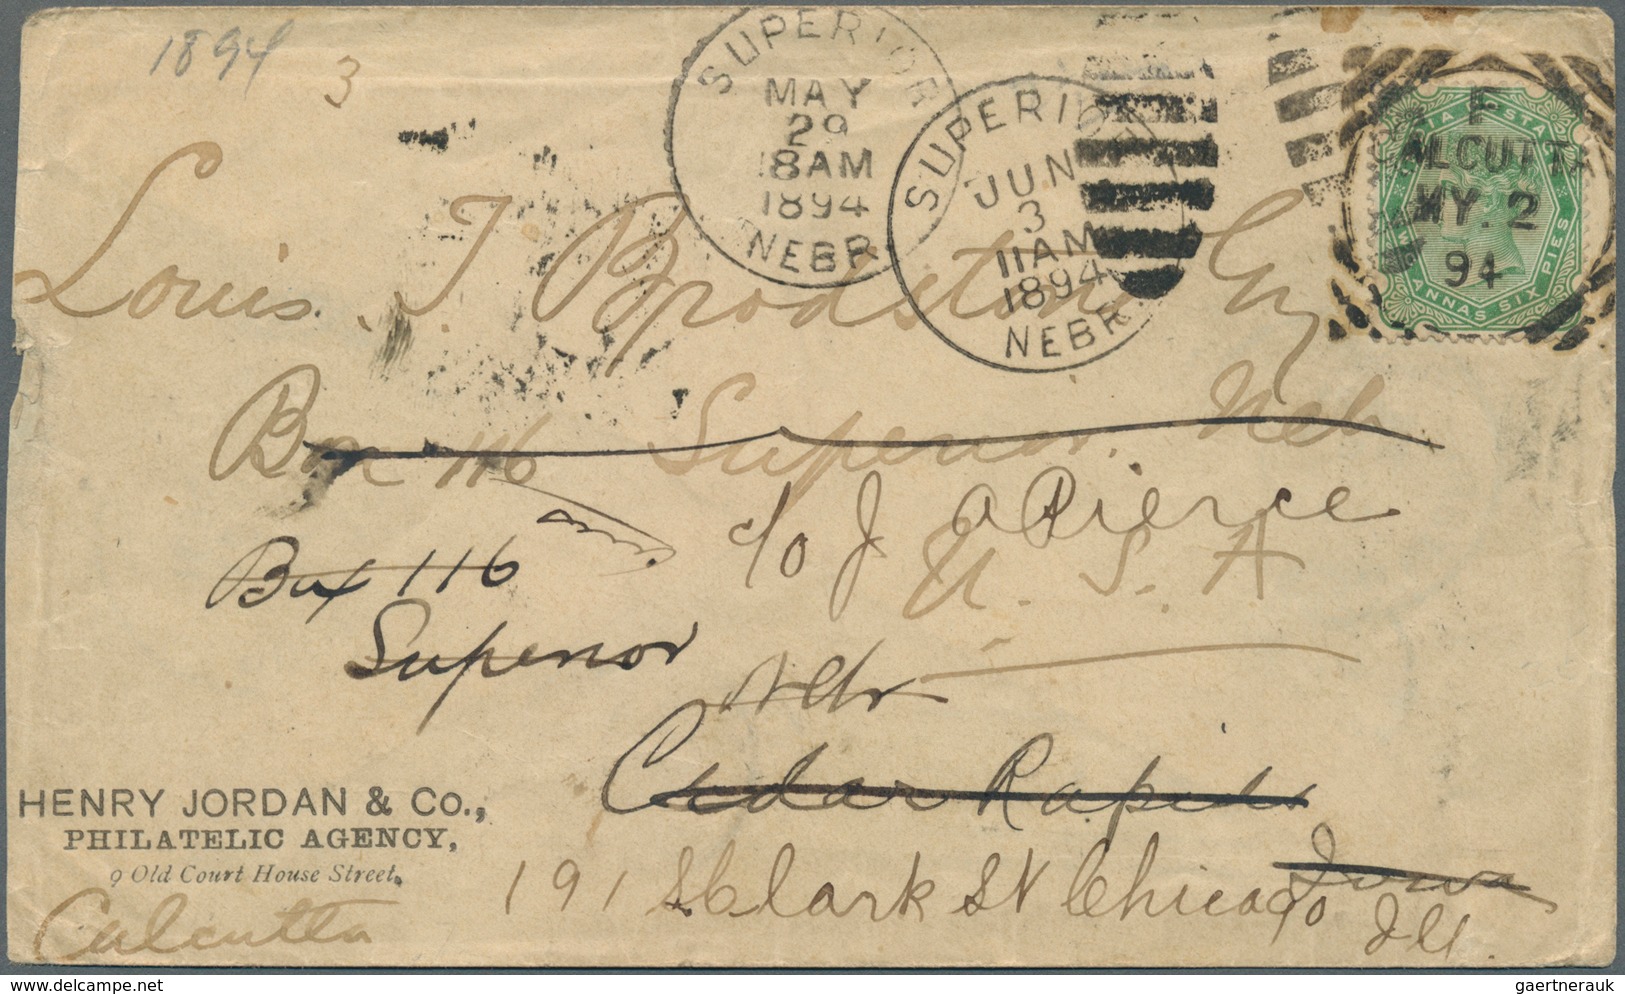 Indien: 1887-1902: Four covers and postal stationery items from India to the U.S.A. and one cover (1